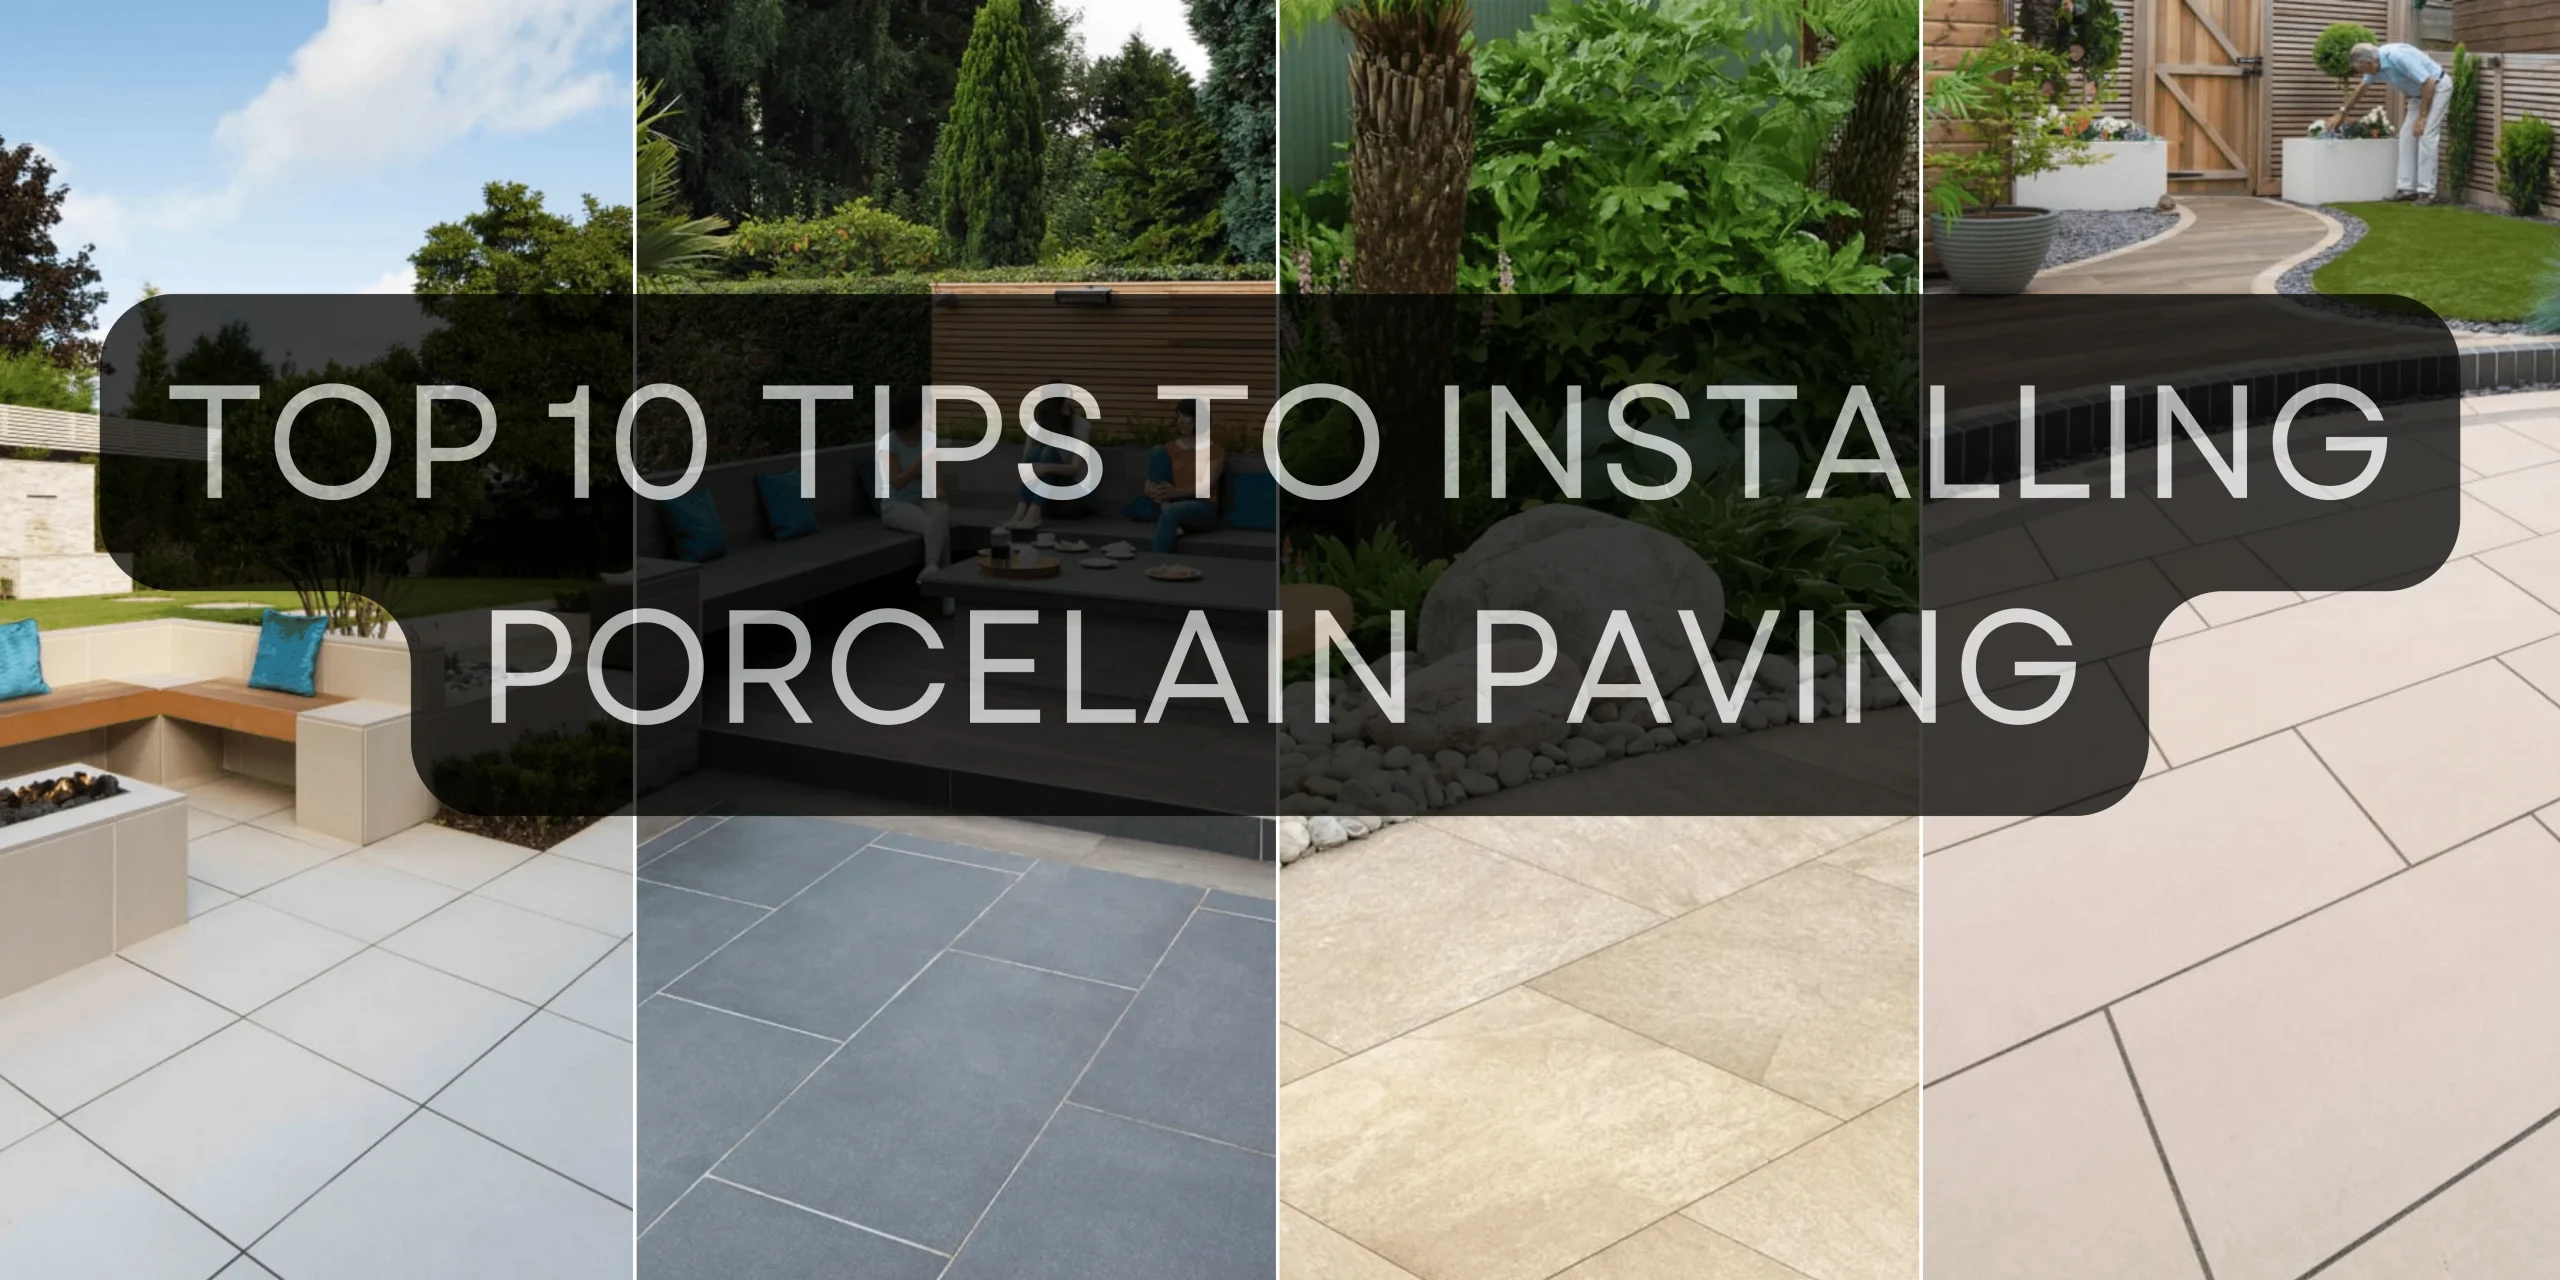 Top 10 tips to laying porcelain paving